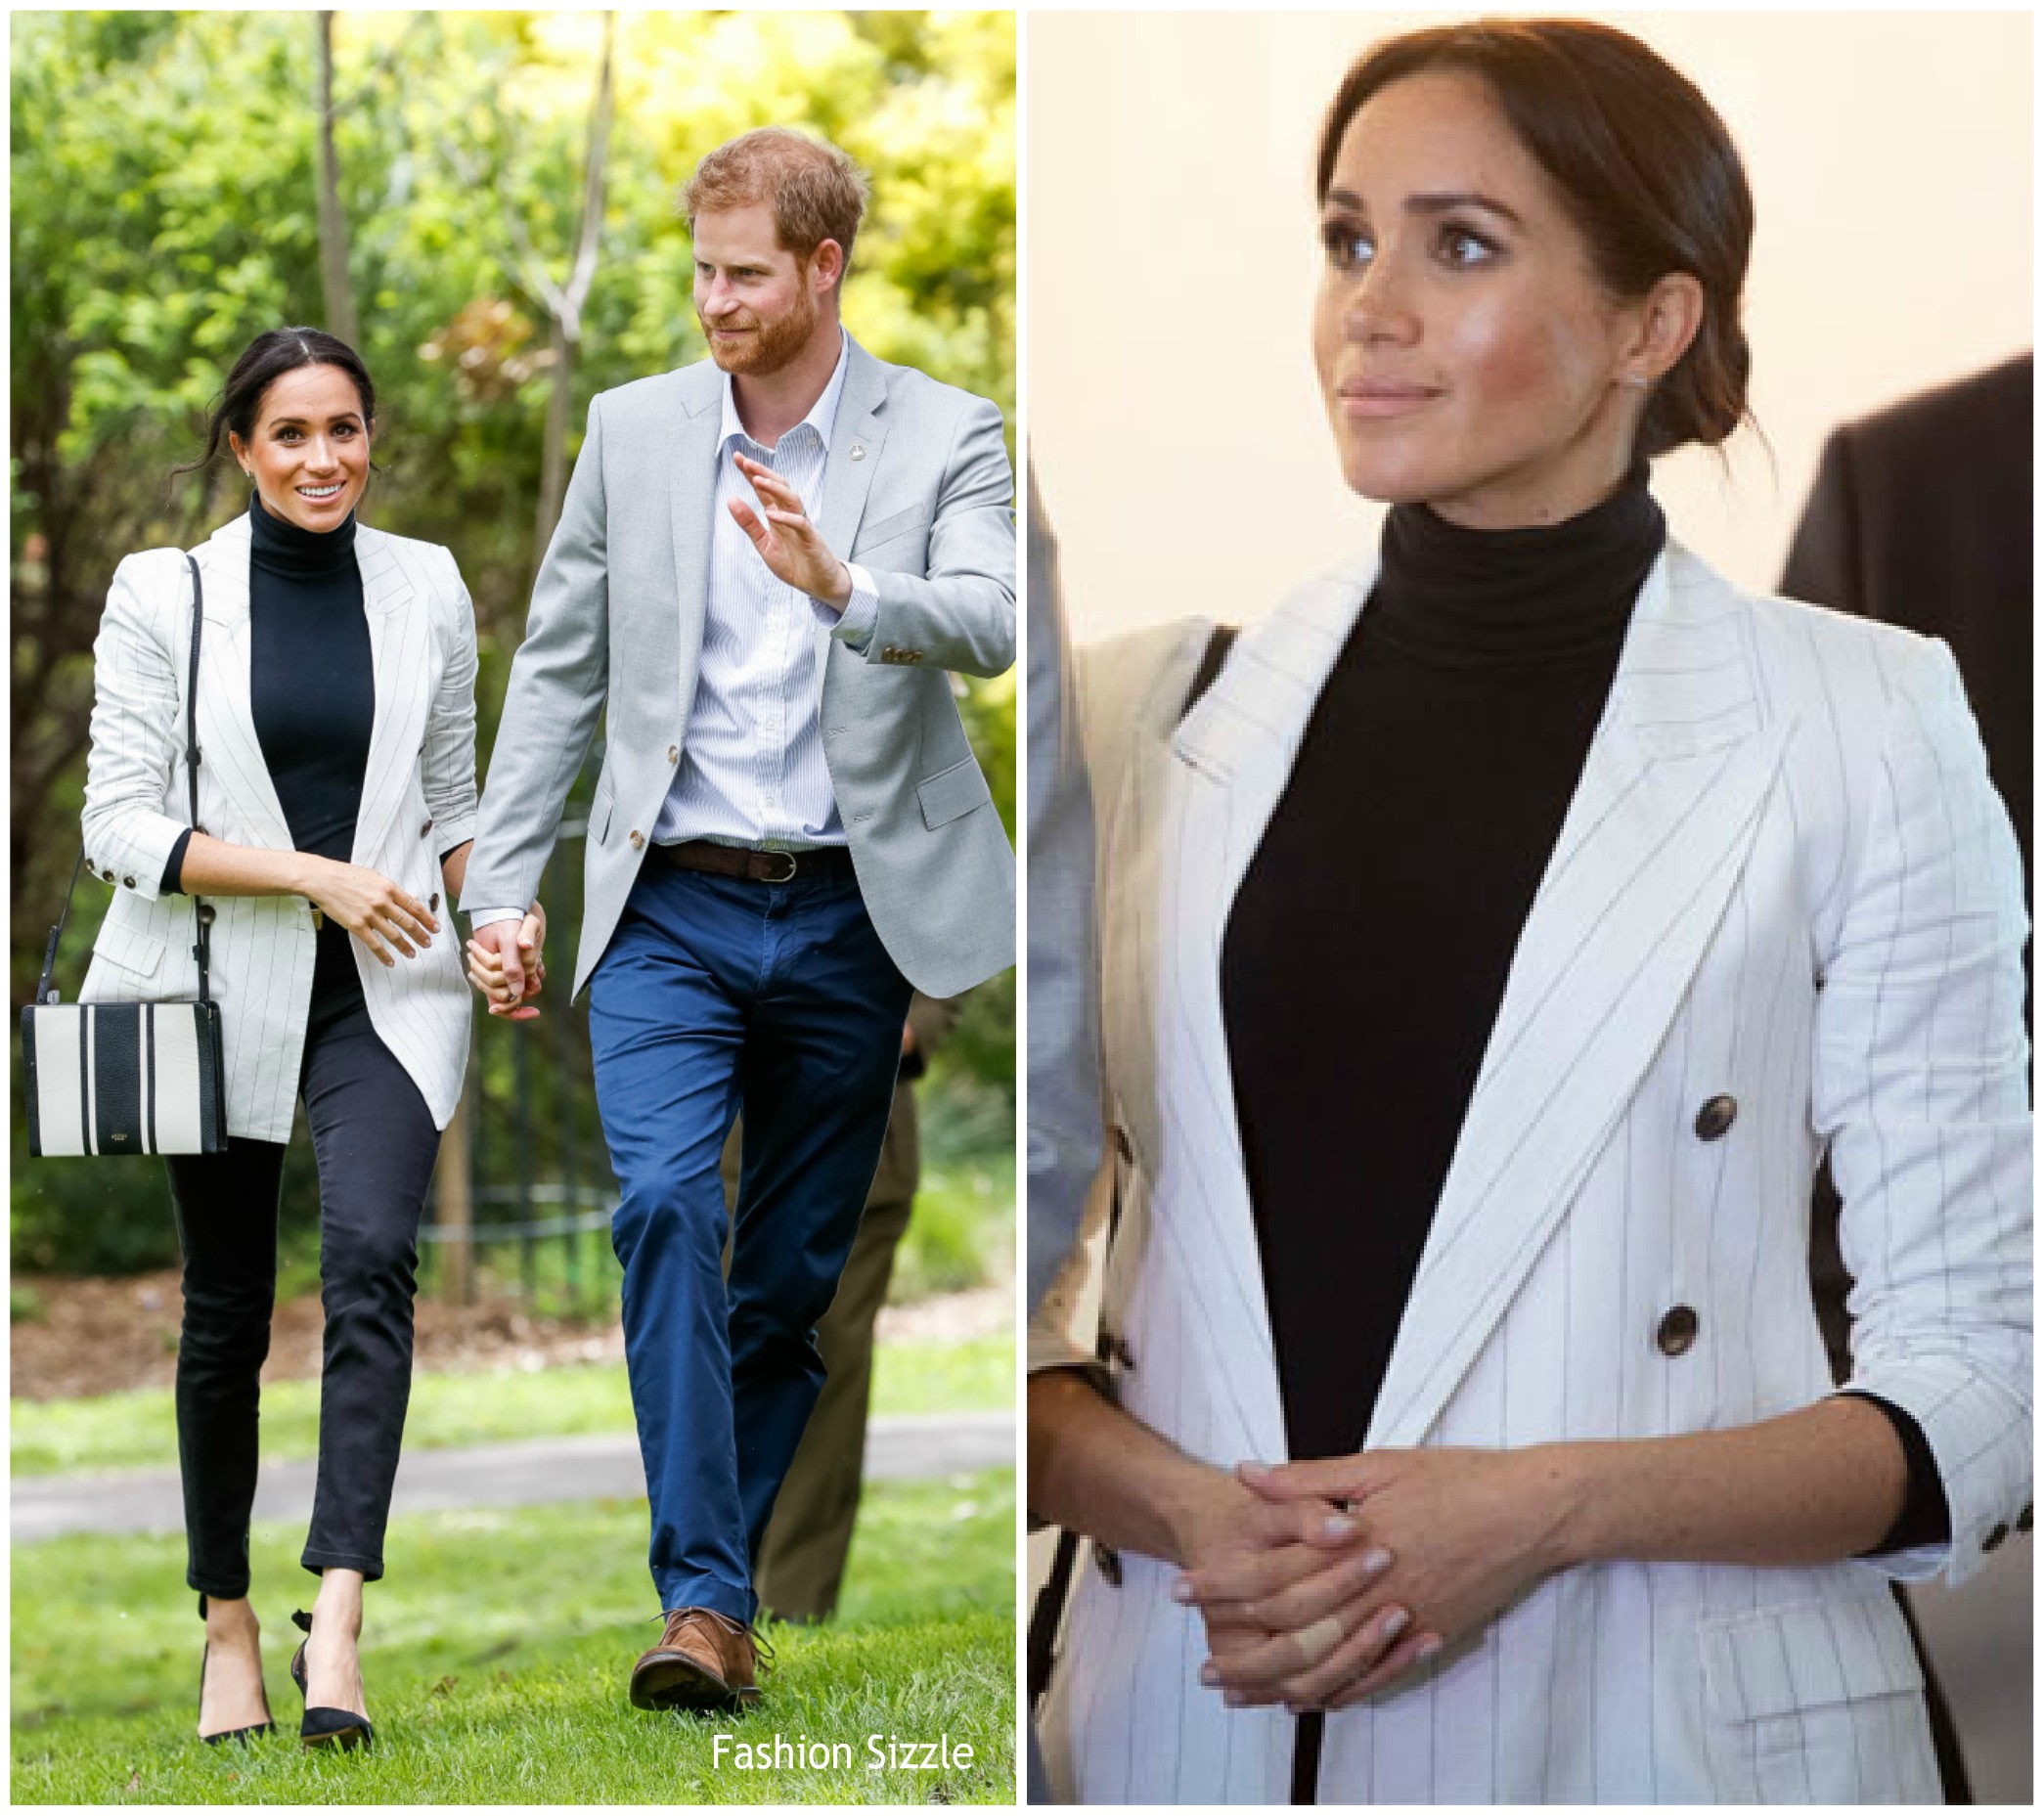 meghan-duchess-of-sussex-in-lagence-invictus-games-day-2-in-australia